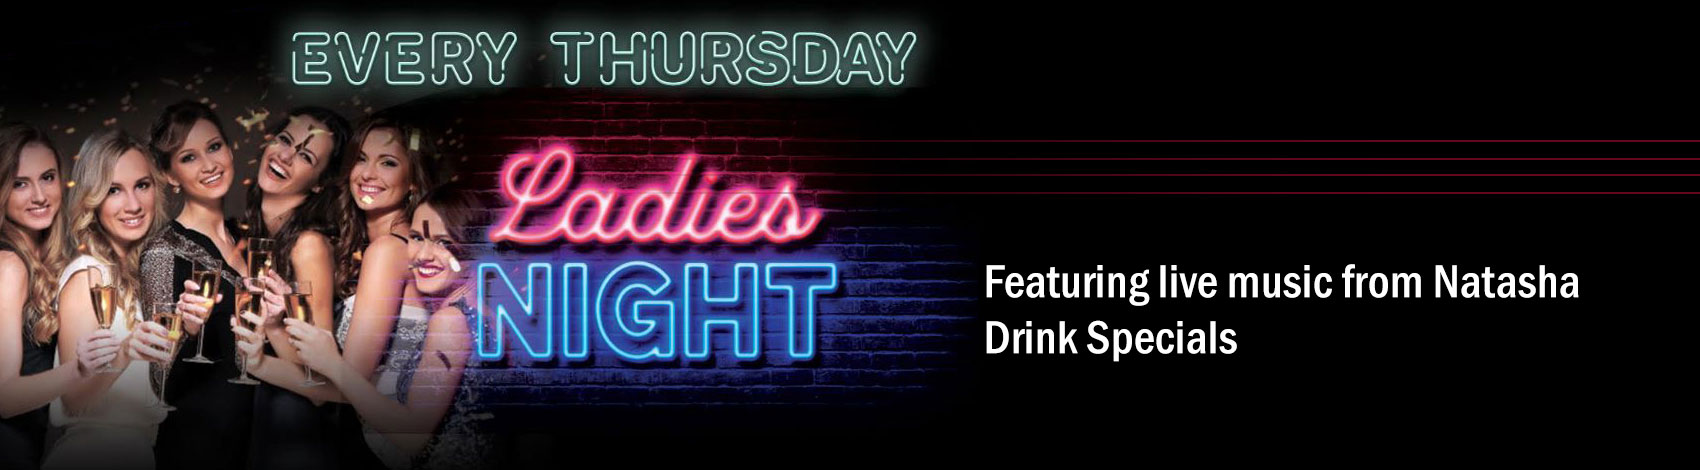 Thursday Night - Ladies Night featuring live music from Natasha, Drink Specials